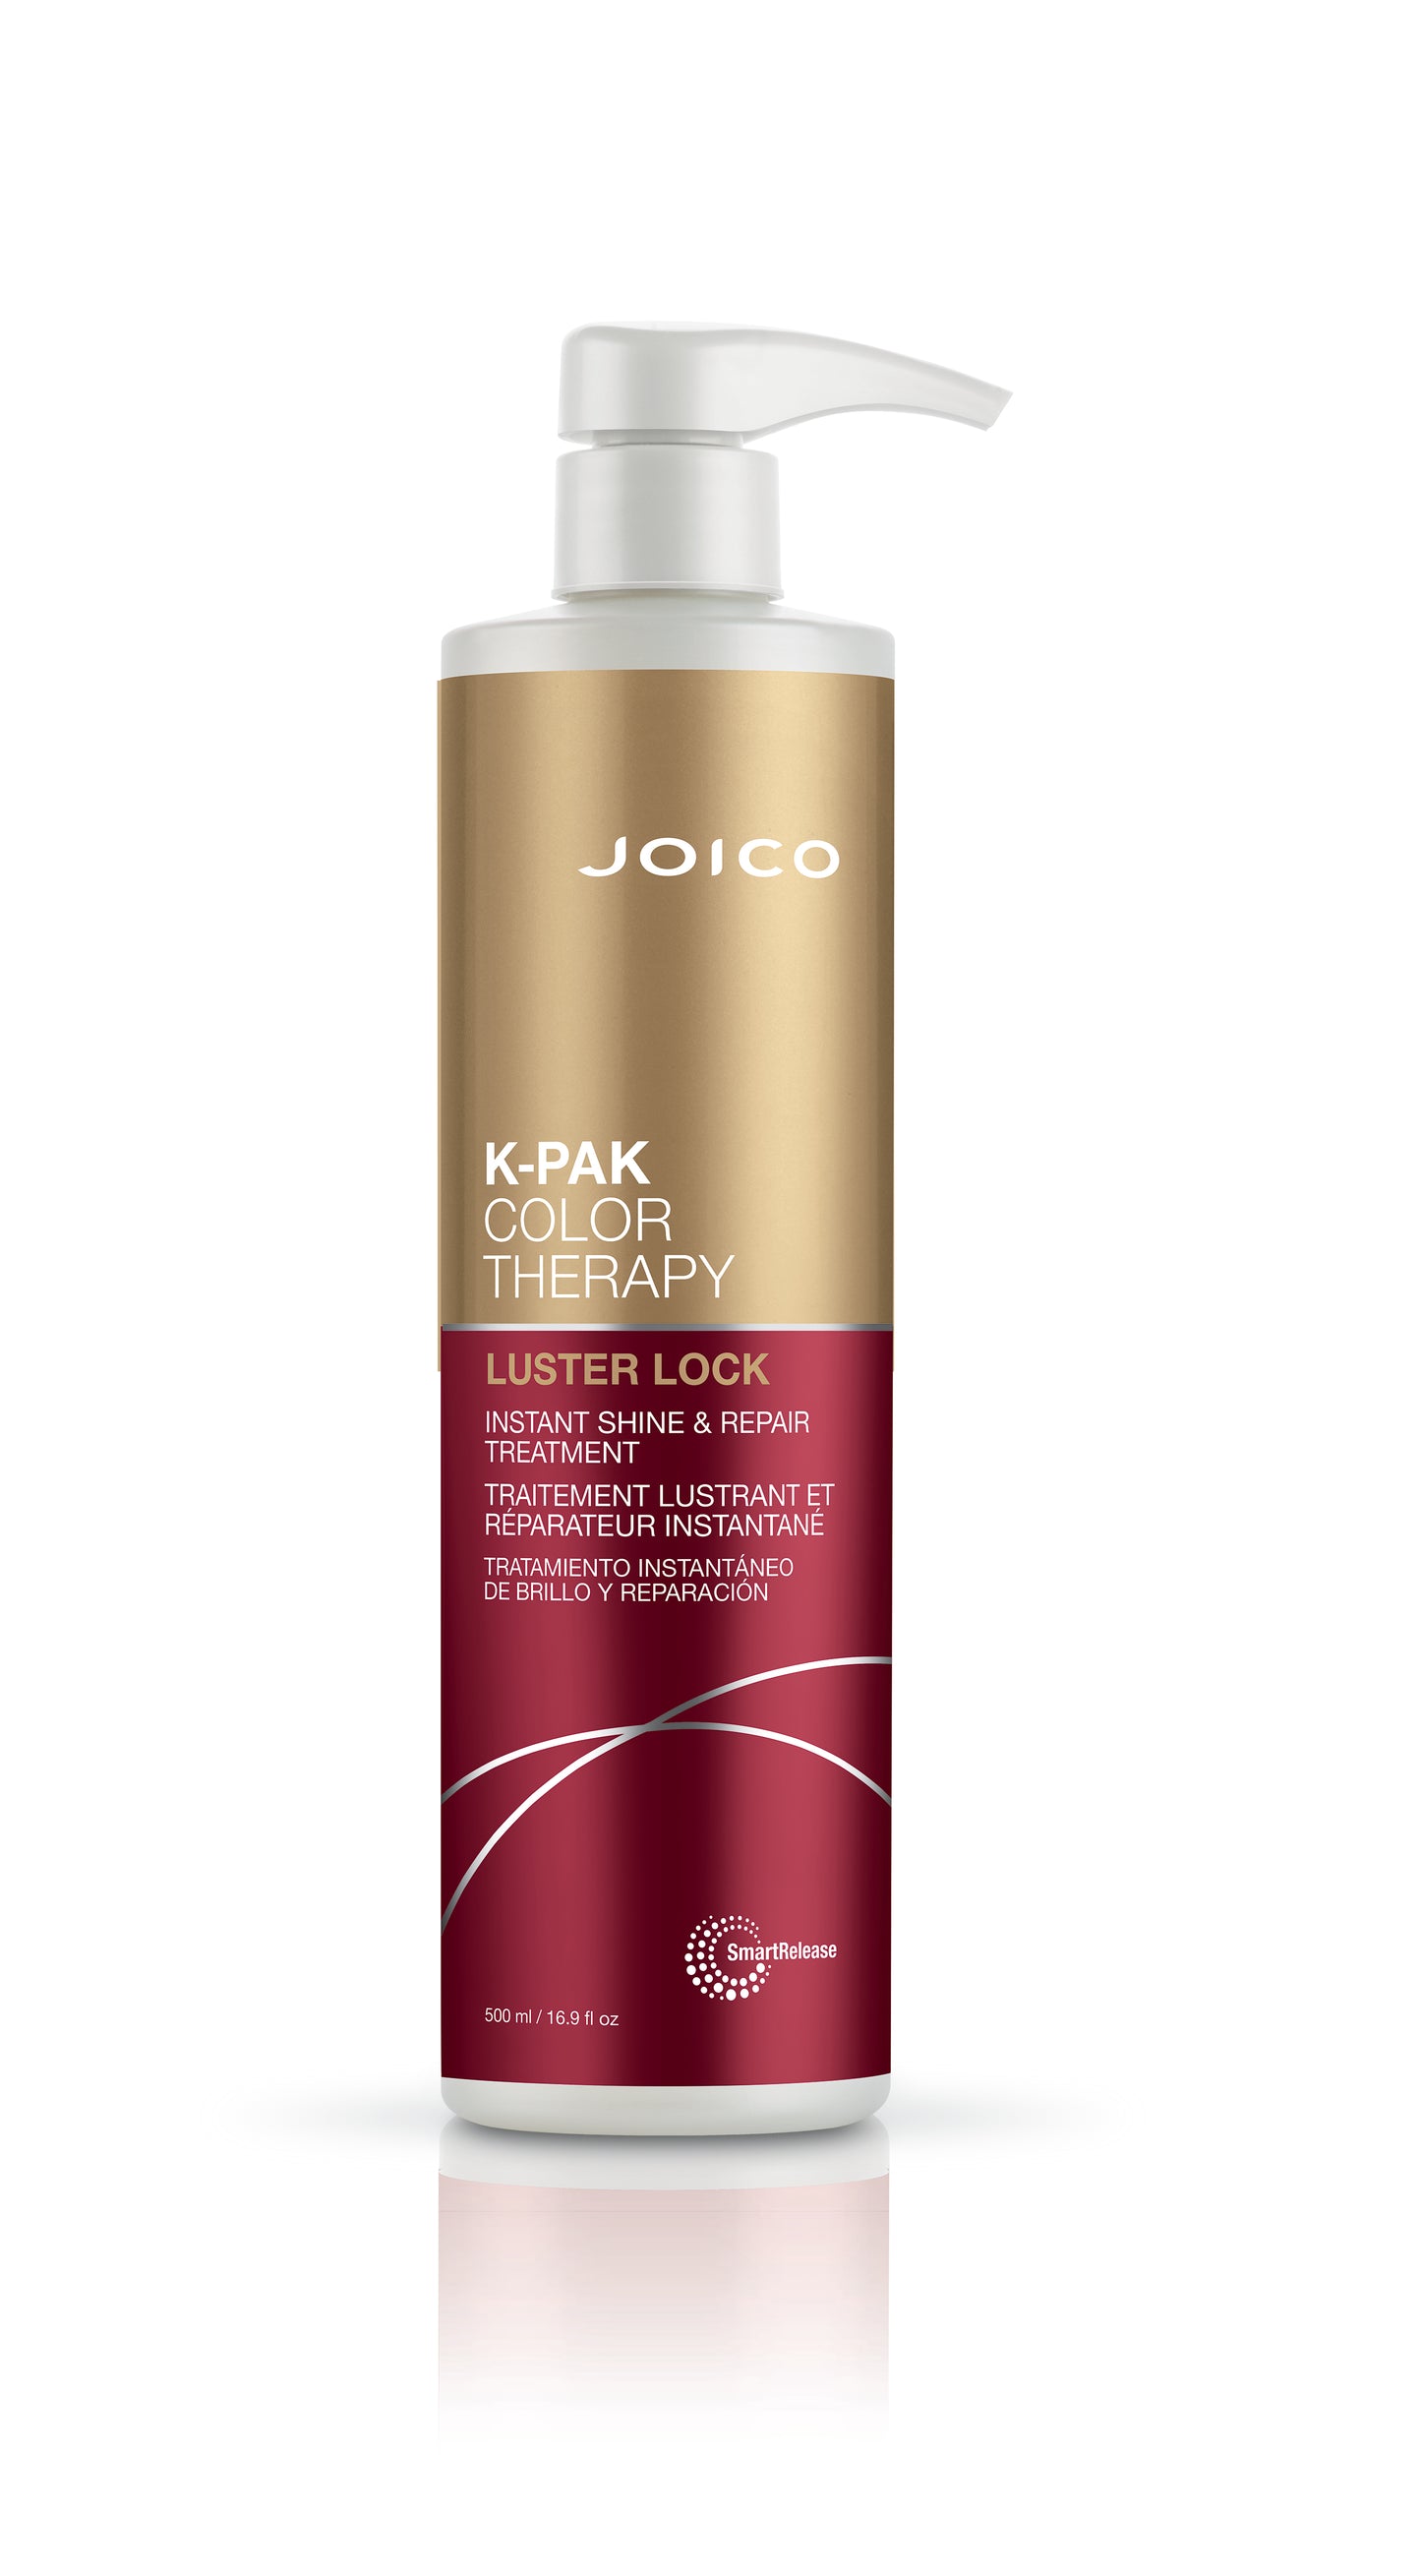 Joico K-PAK Color Therapy Luster Lock 500ml Treatment